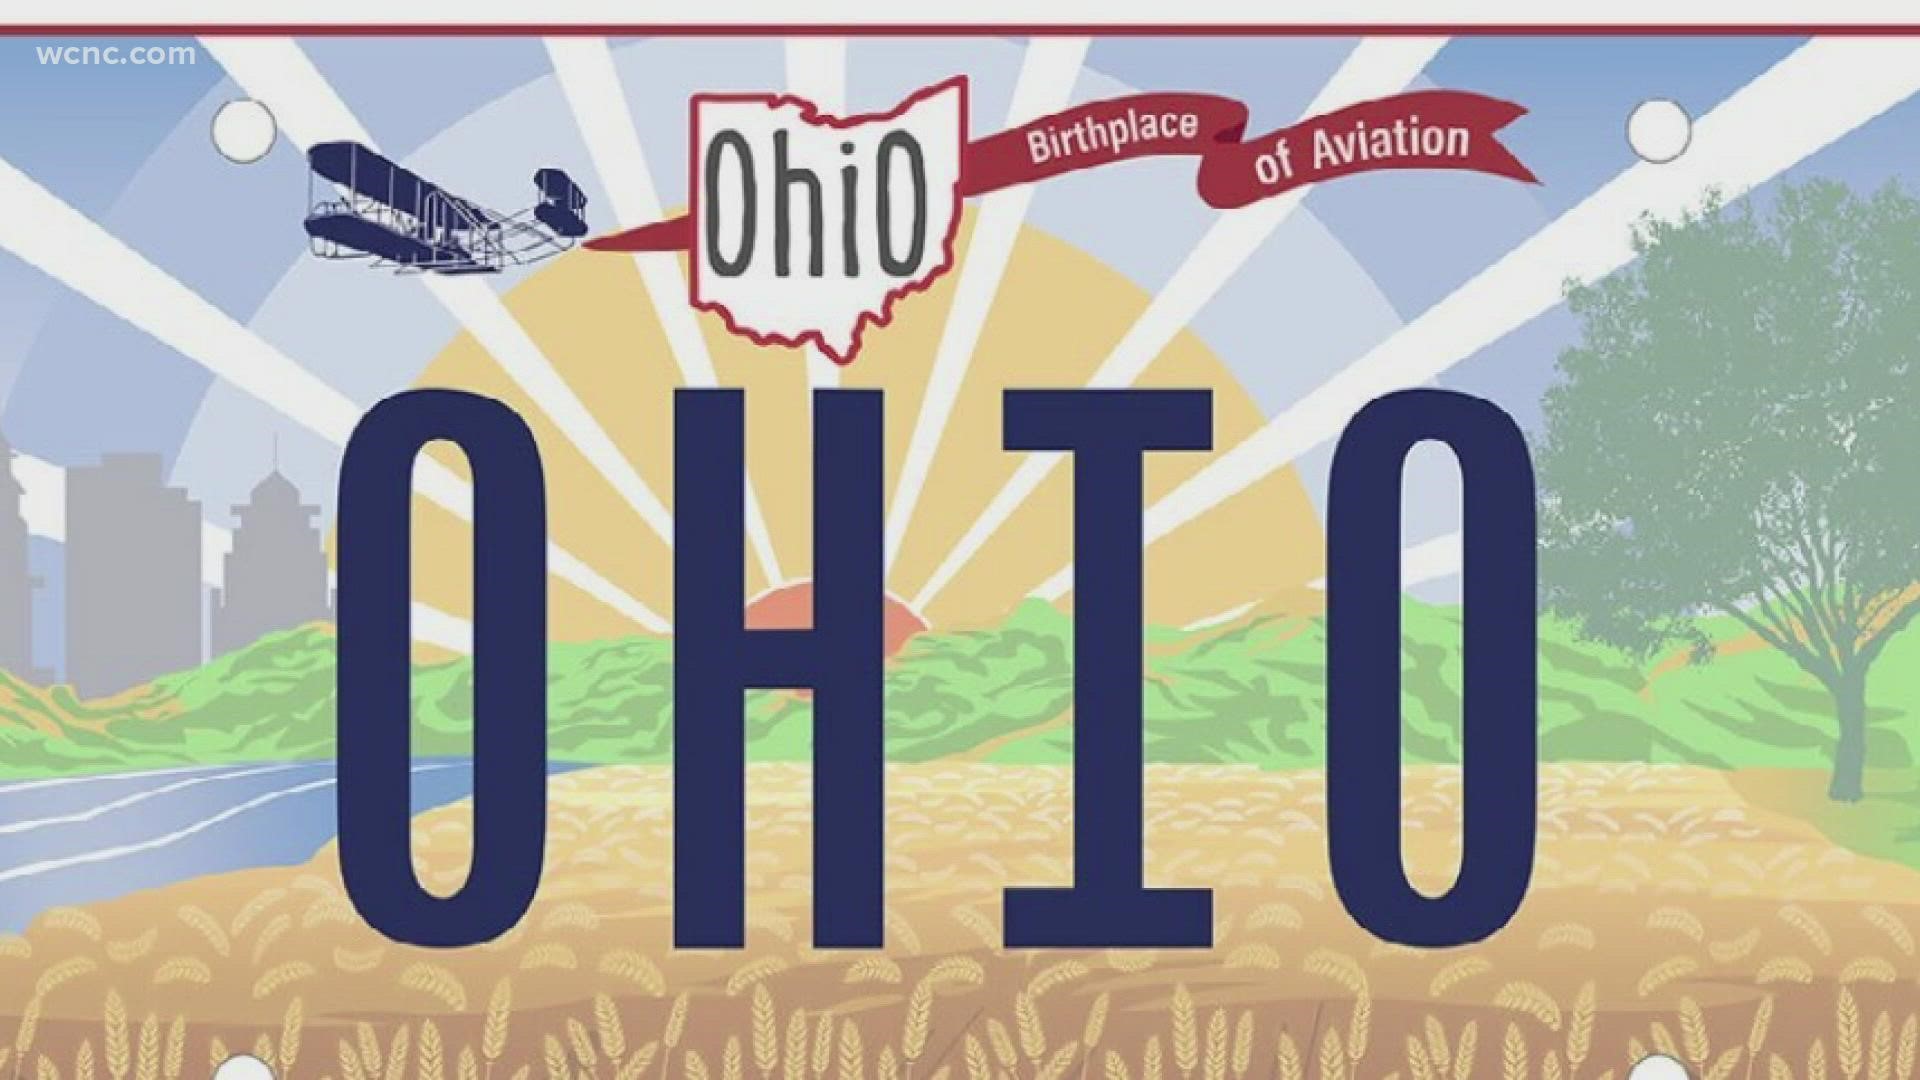 It all stems from a mistake on Ohio's new license plate design with a banner that reads "Birthplace of Aviation."